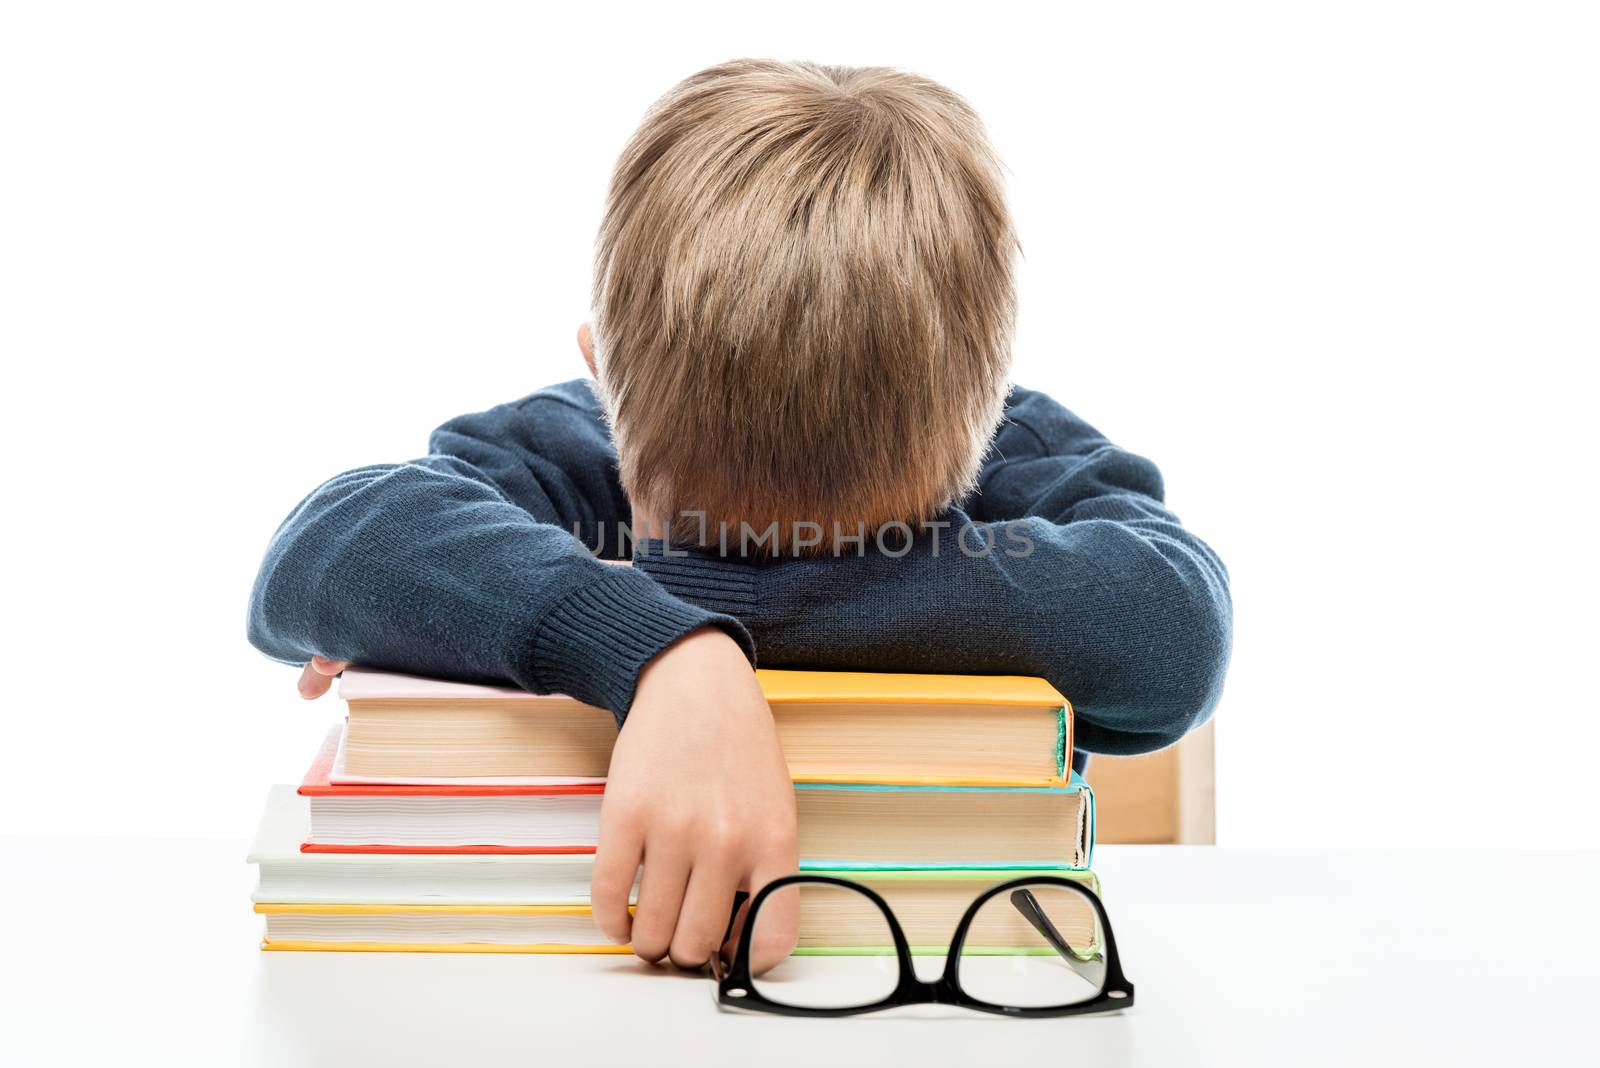 a tired little schoolboy fell asleep on books during a lesson by kosmsos111